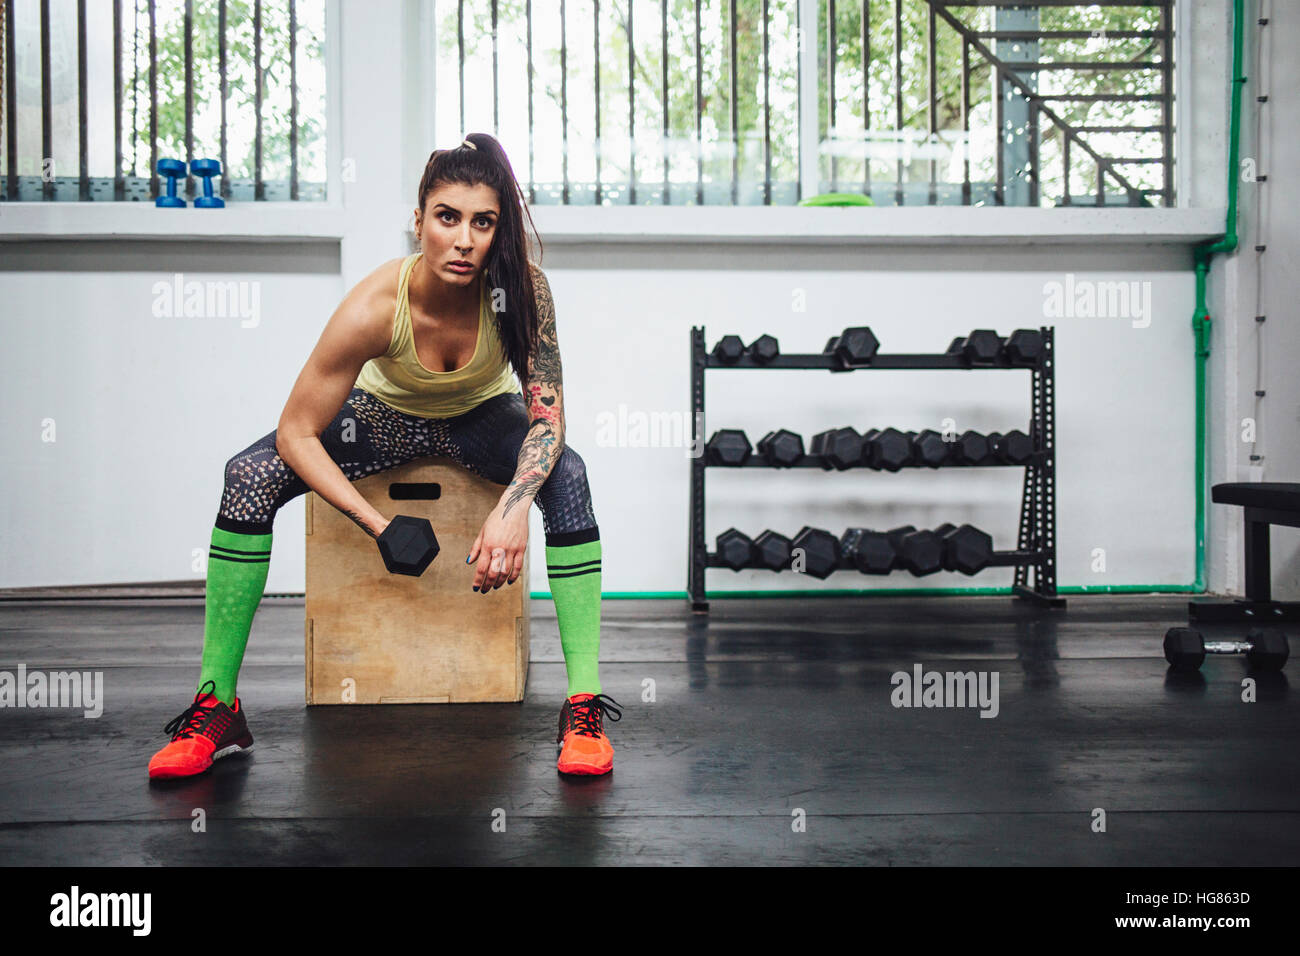 Woman lifting dumbbell while sitting on box in gym Stock Photo